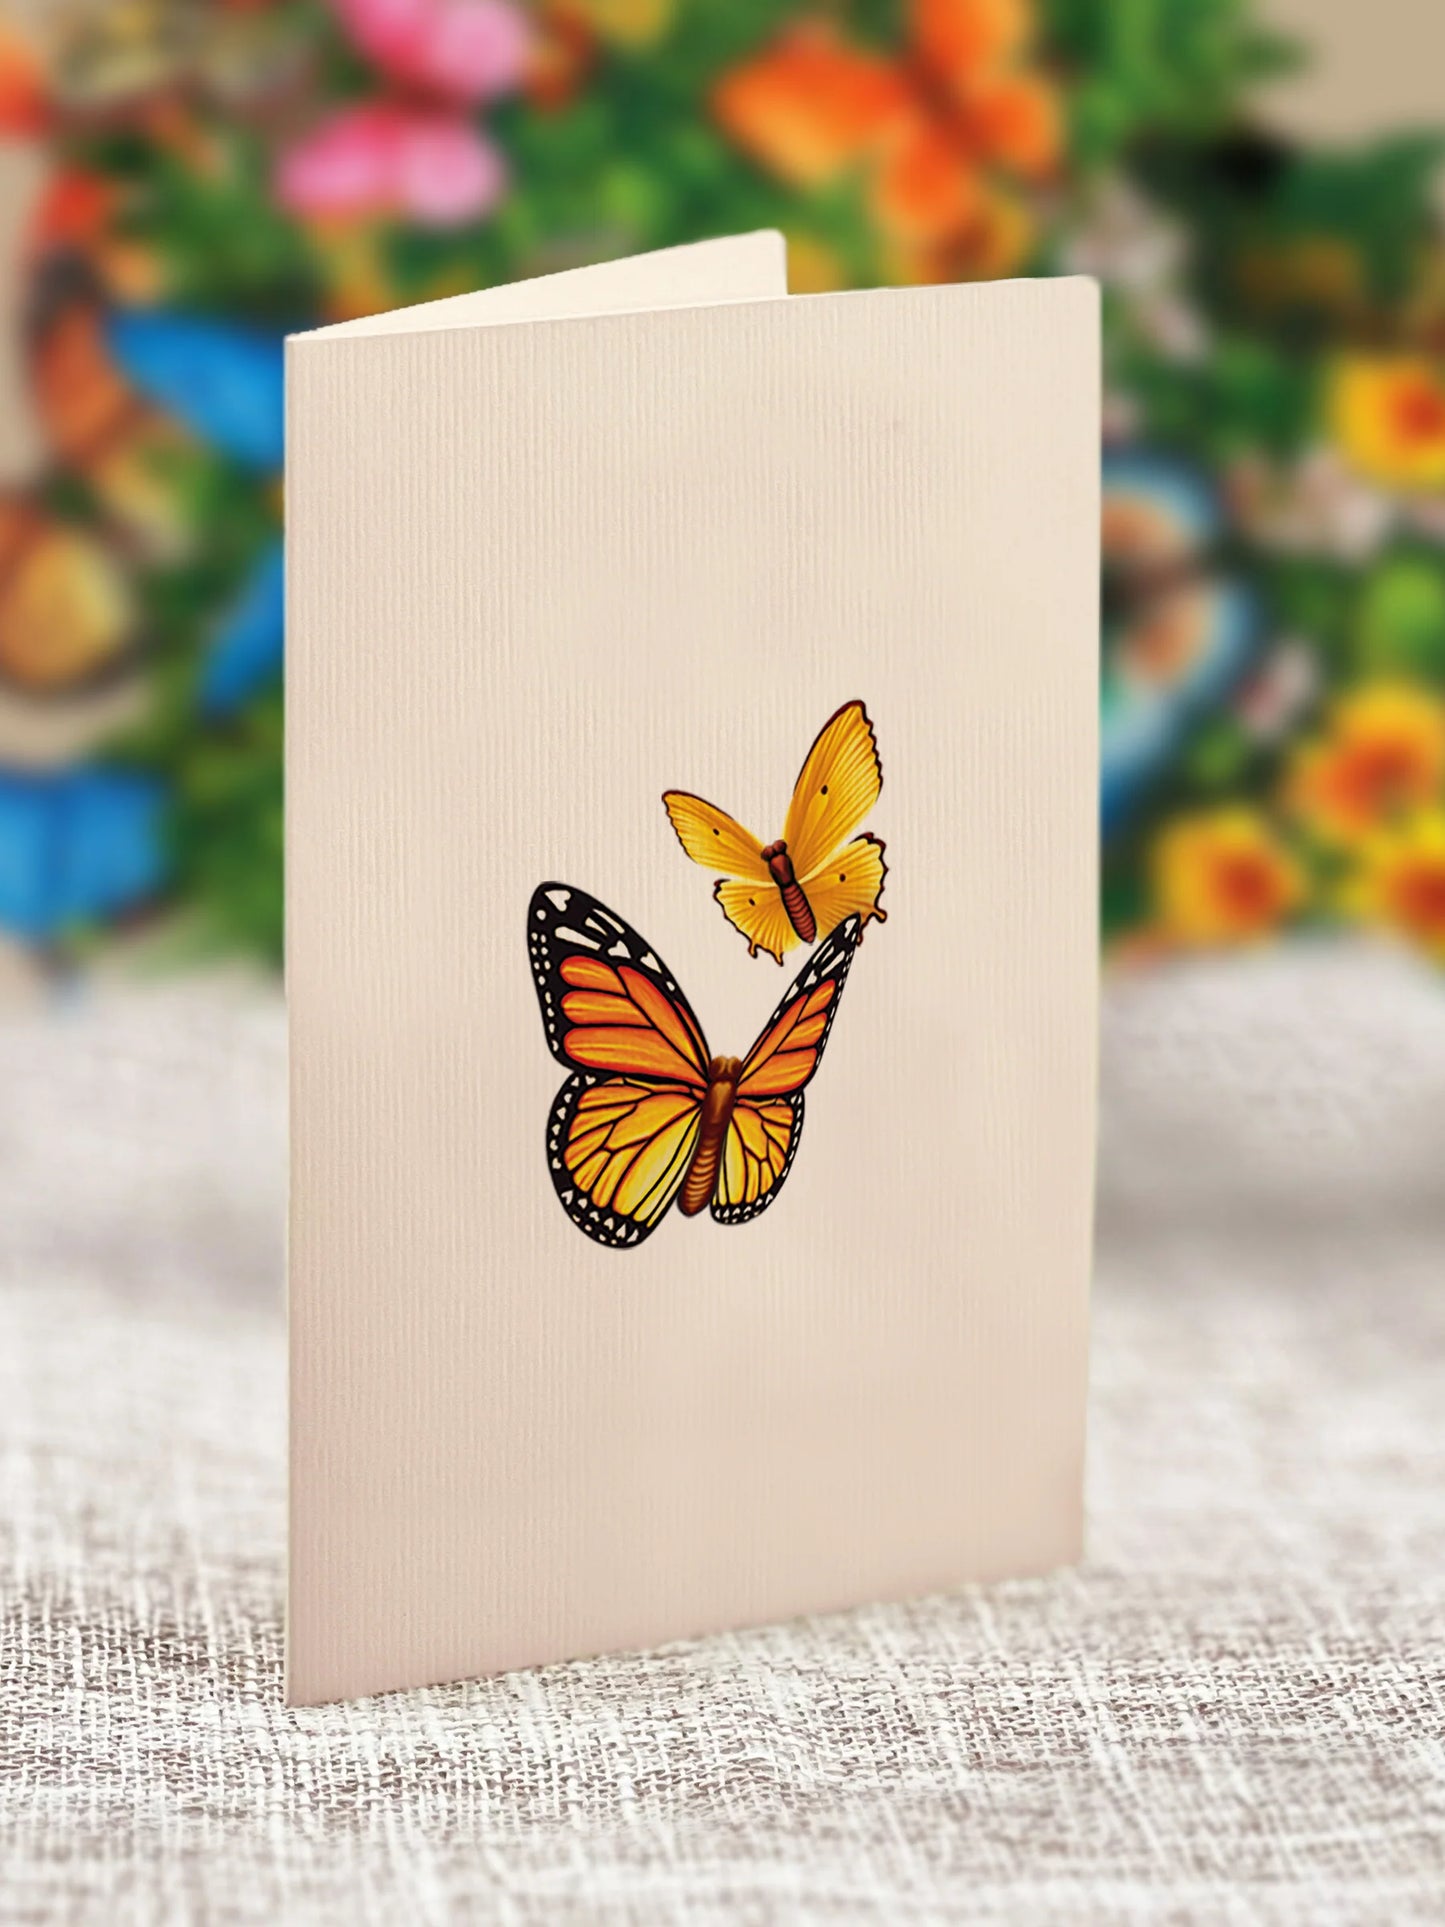 close-up of enclosure card with two butterflies printed on it.